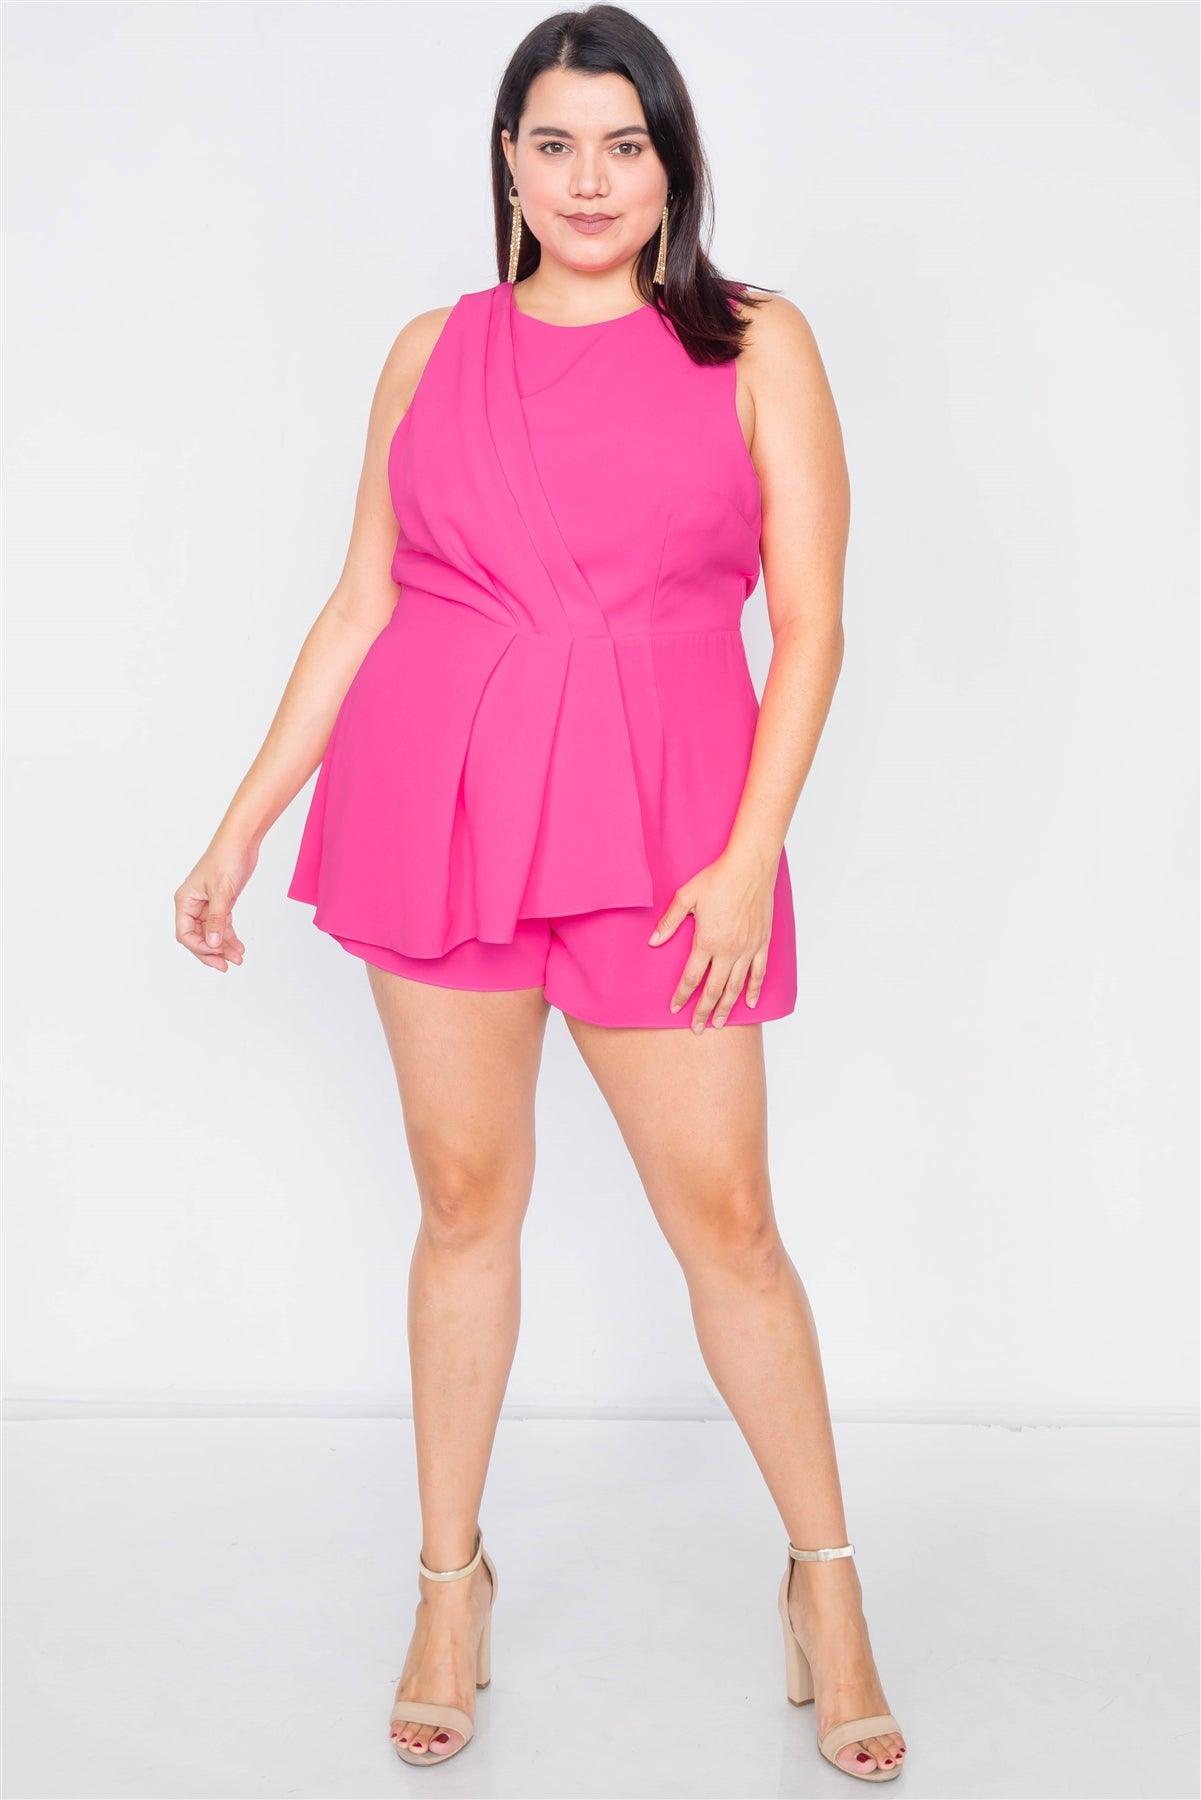 Plus Size Hot Pink Pleated Short Romper